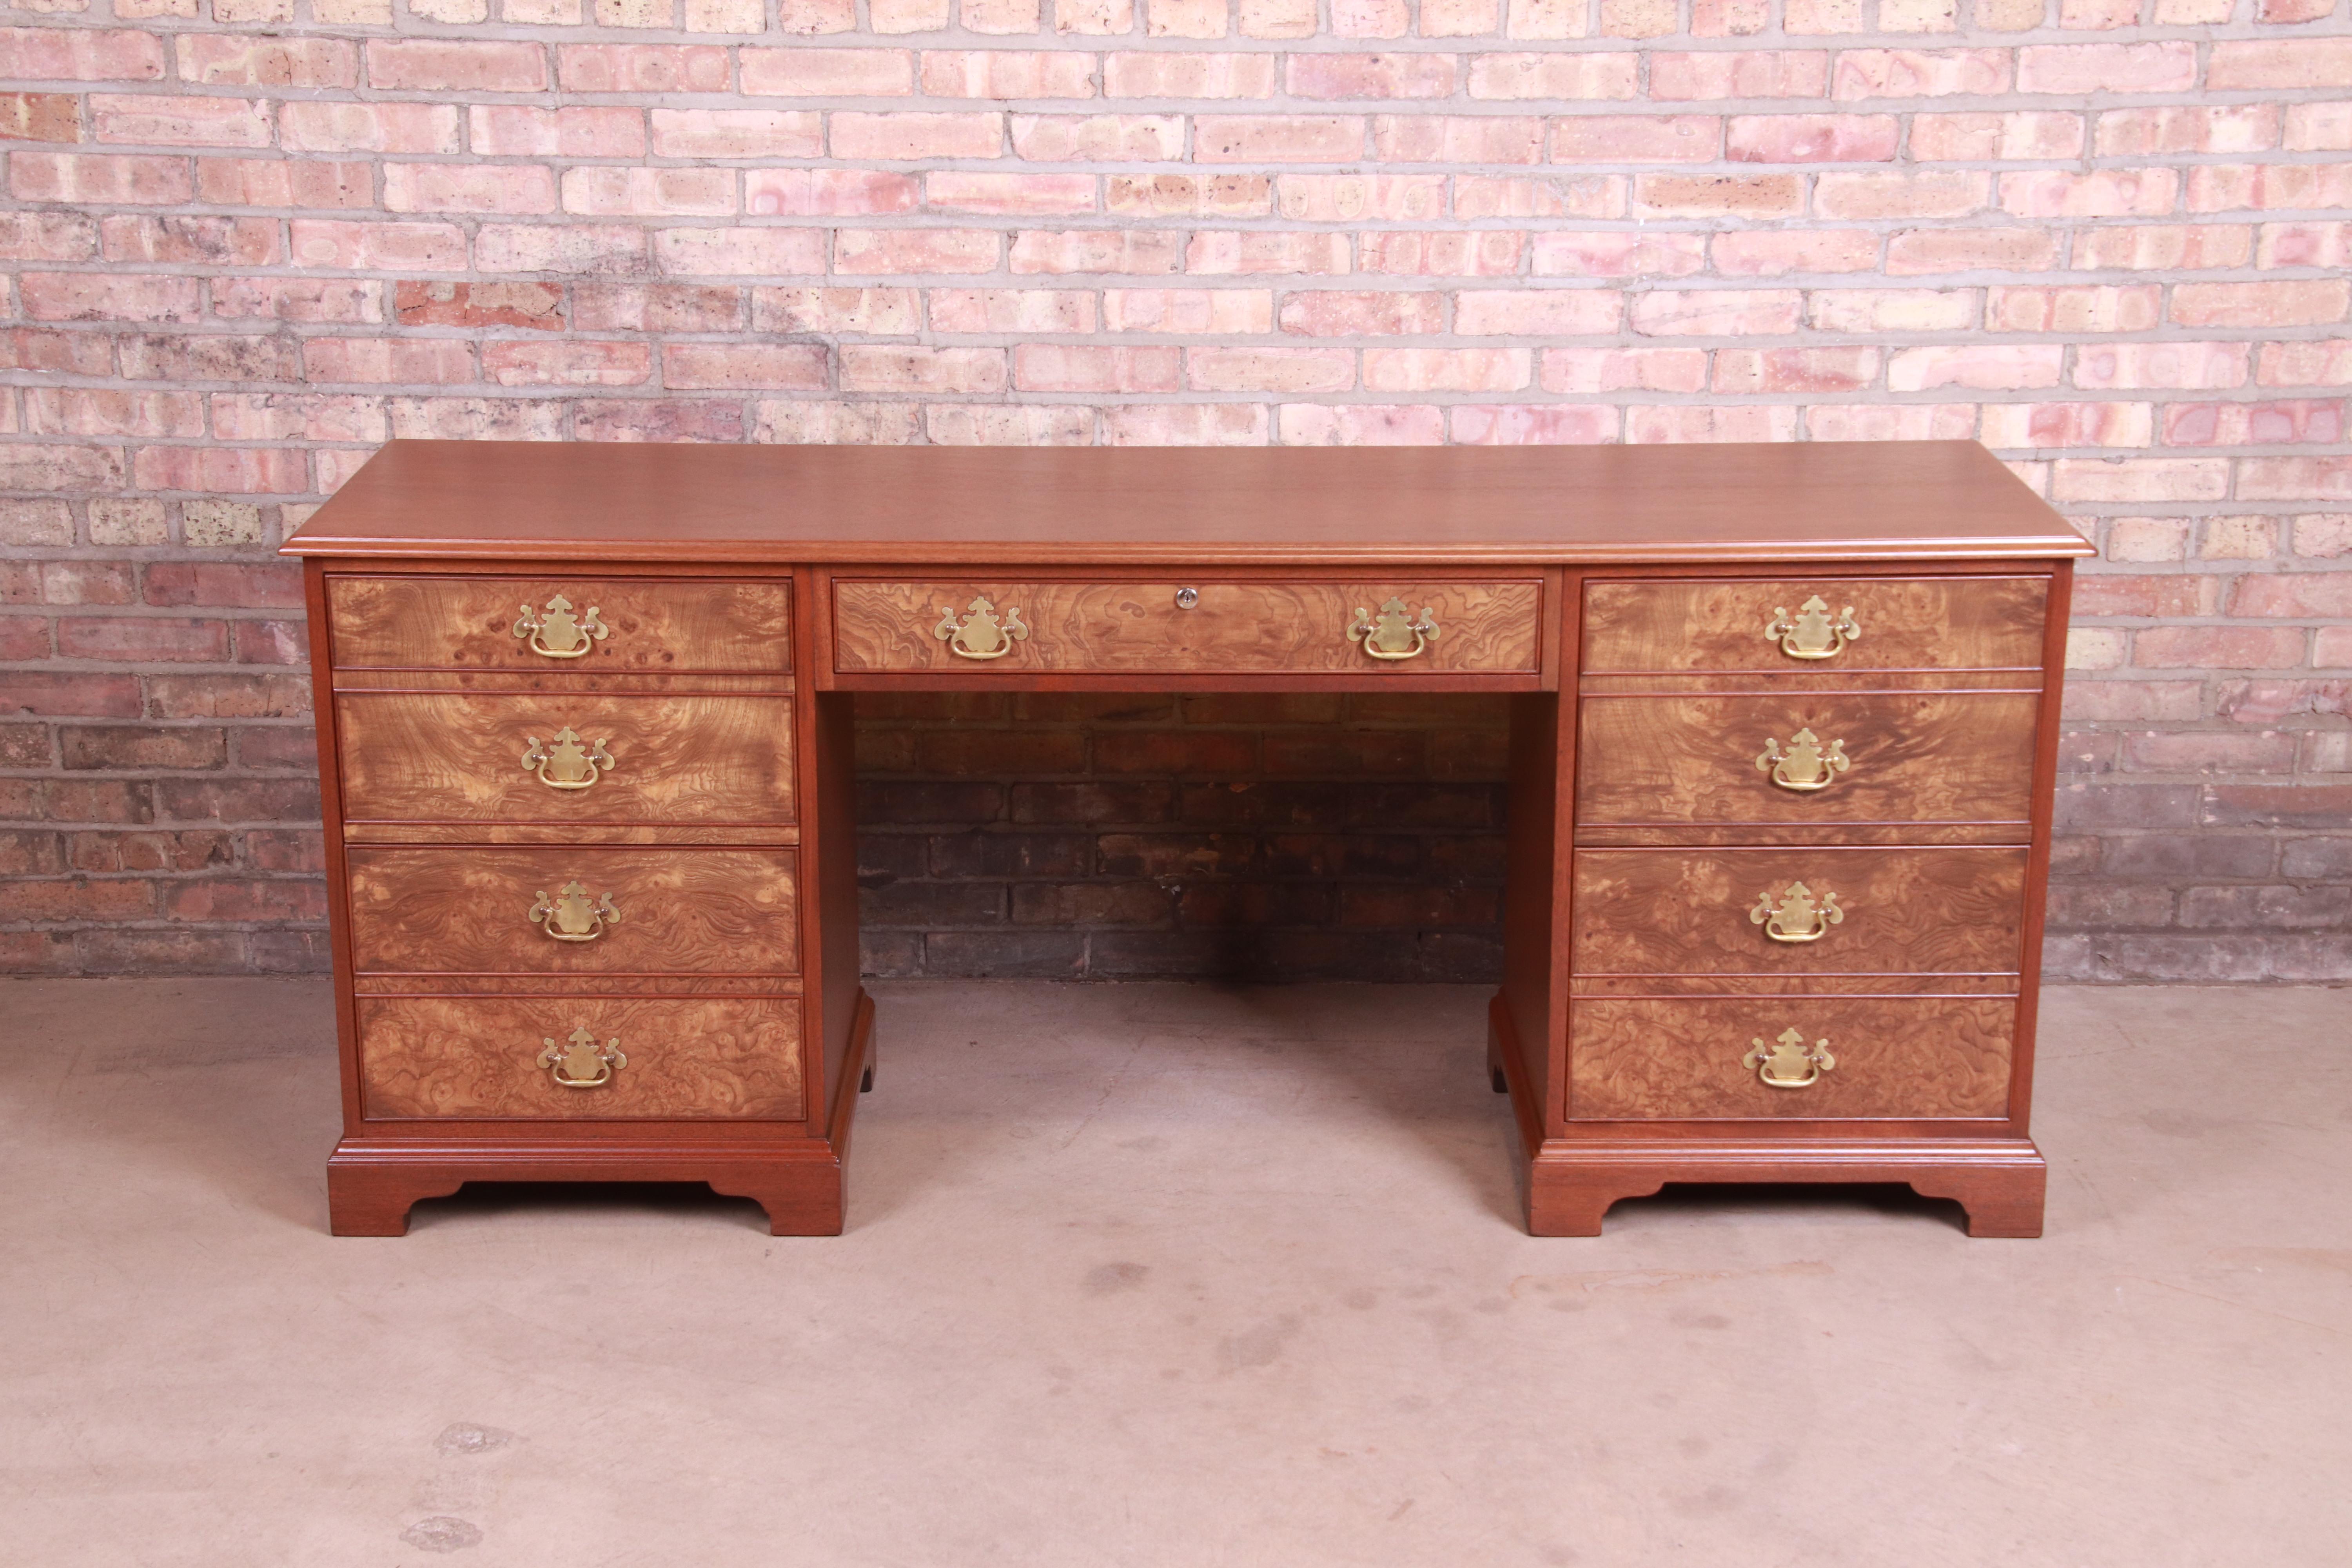 An exceptional English Chippendale style kneehole desk or credenza

By Kittinger

USA, circa 1960s

Mahogany, with burled walnut drawer fronts, and original brass hardware.

Measures: 71.5